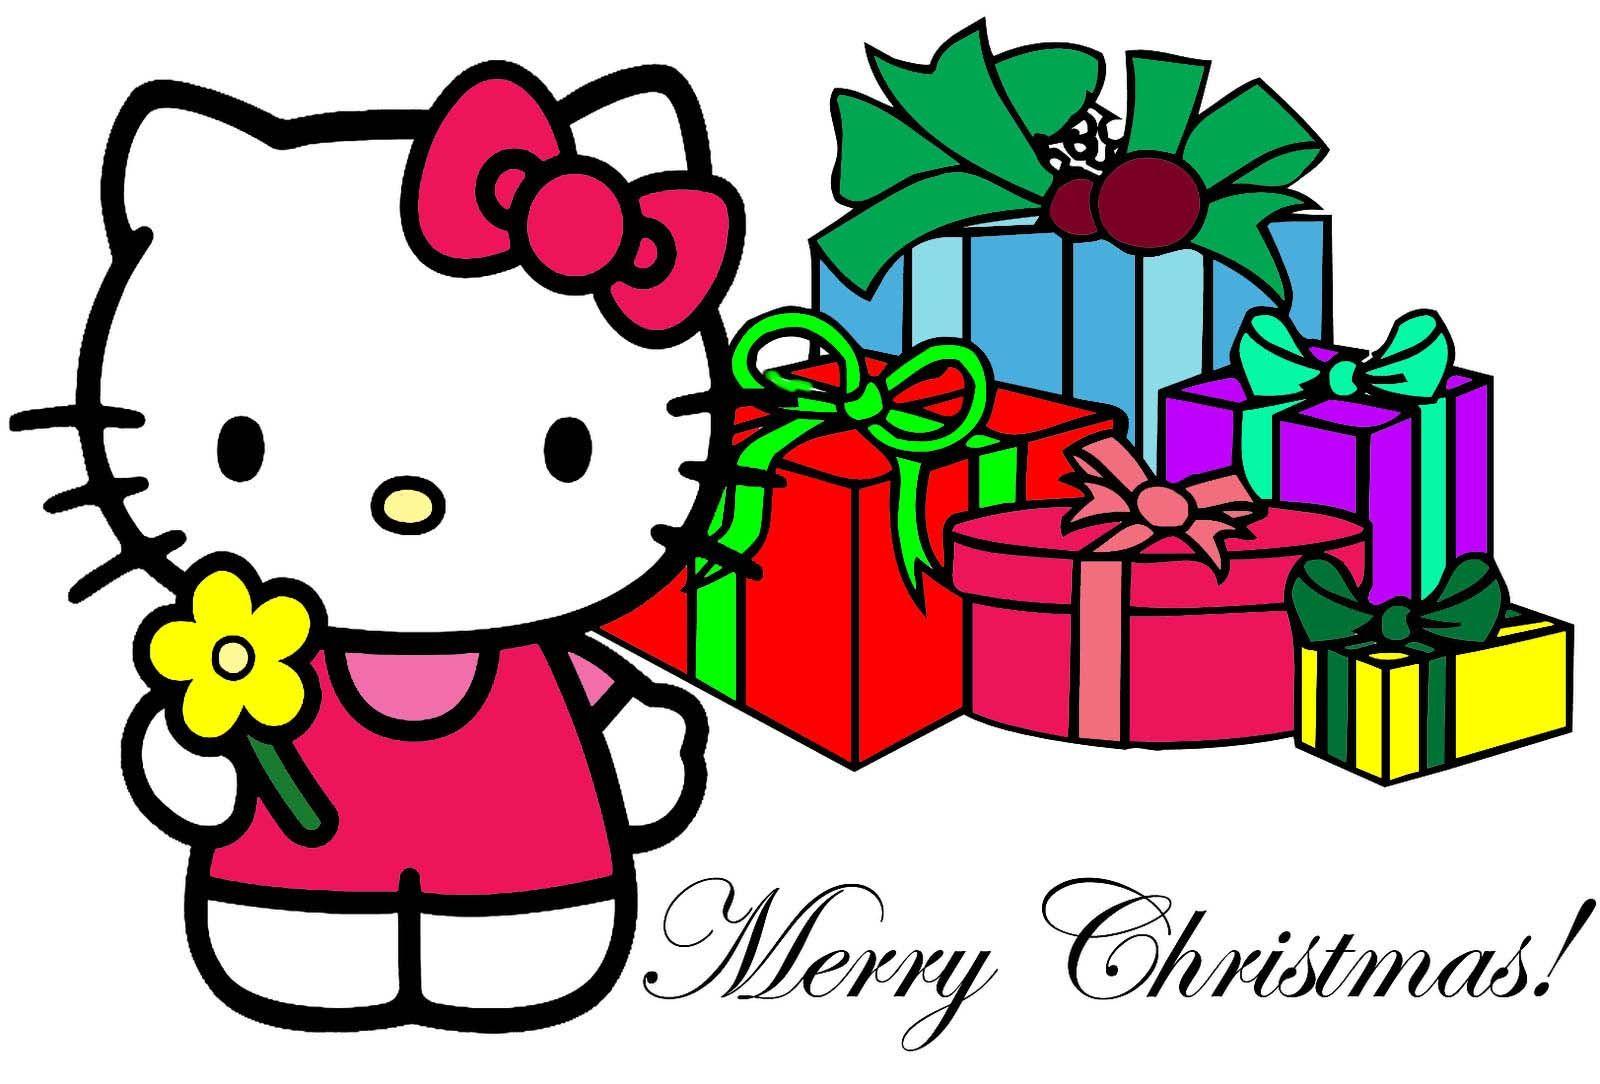 Hello Kitty Christmas Backgrounds 49 pictures